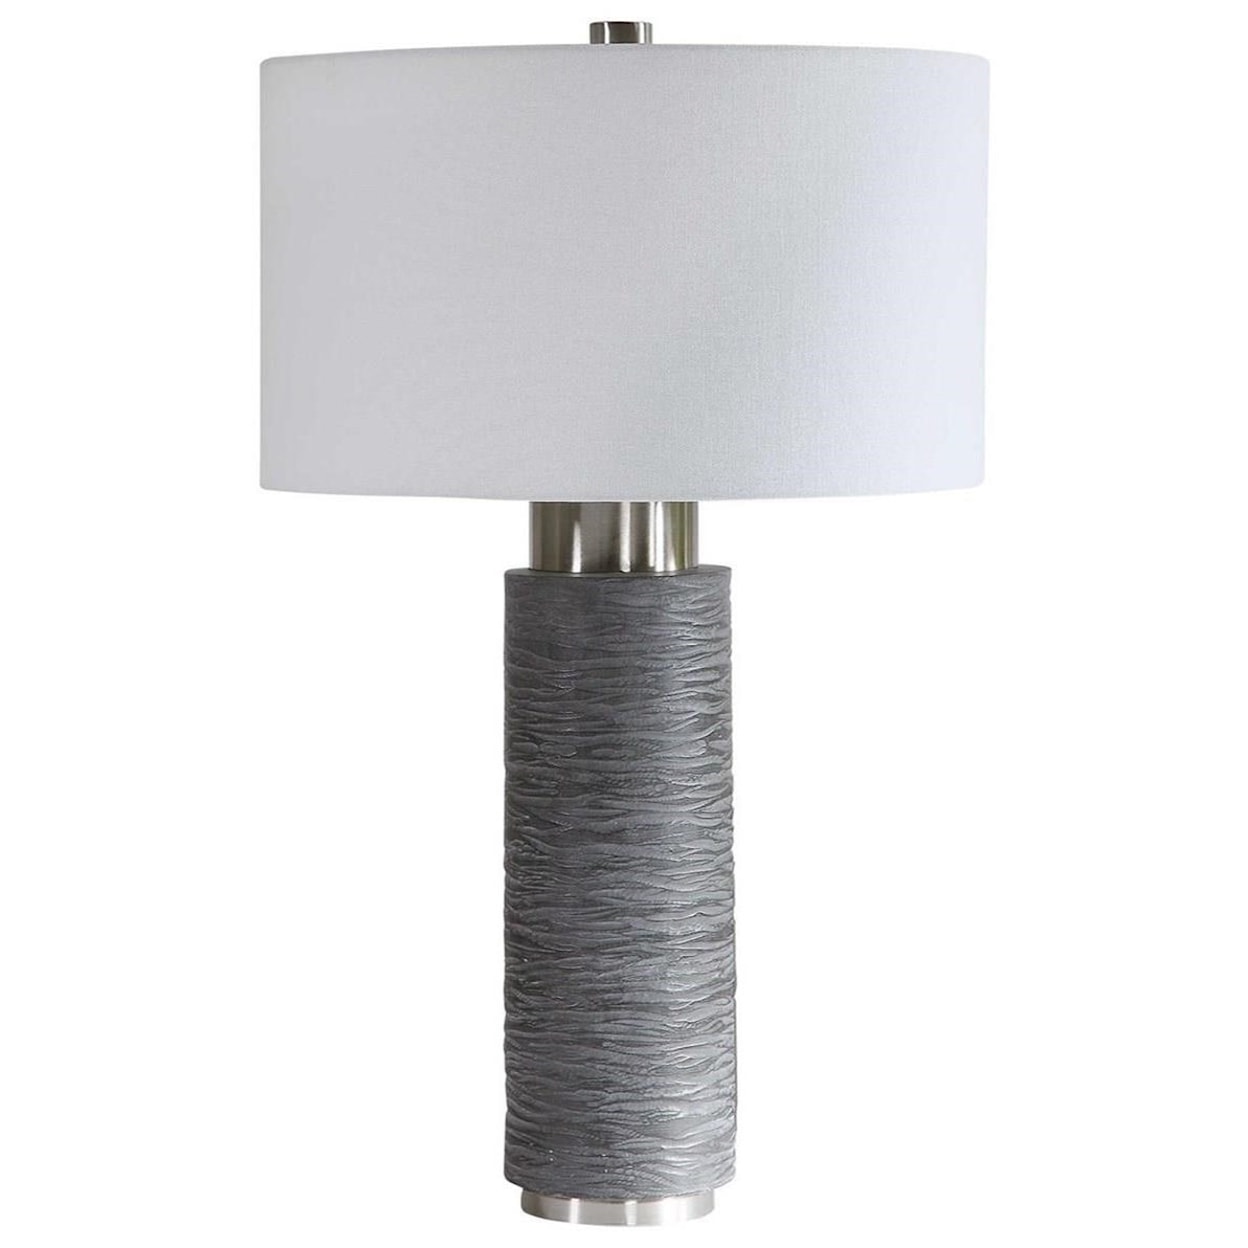 Uttermost Table Lamps Strathmore Stone Gray Table Lamp